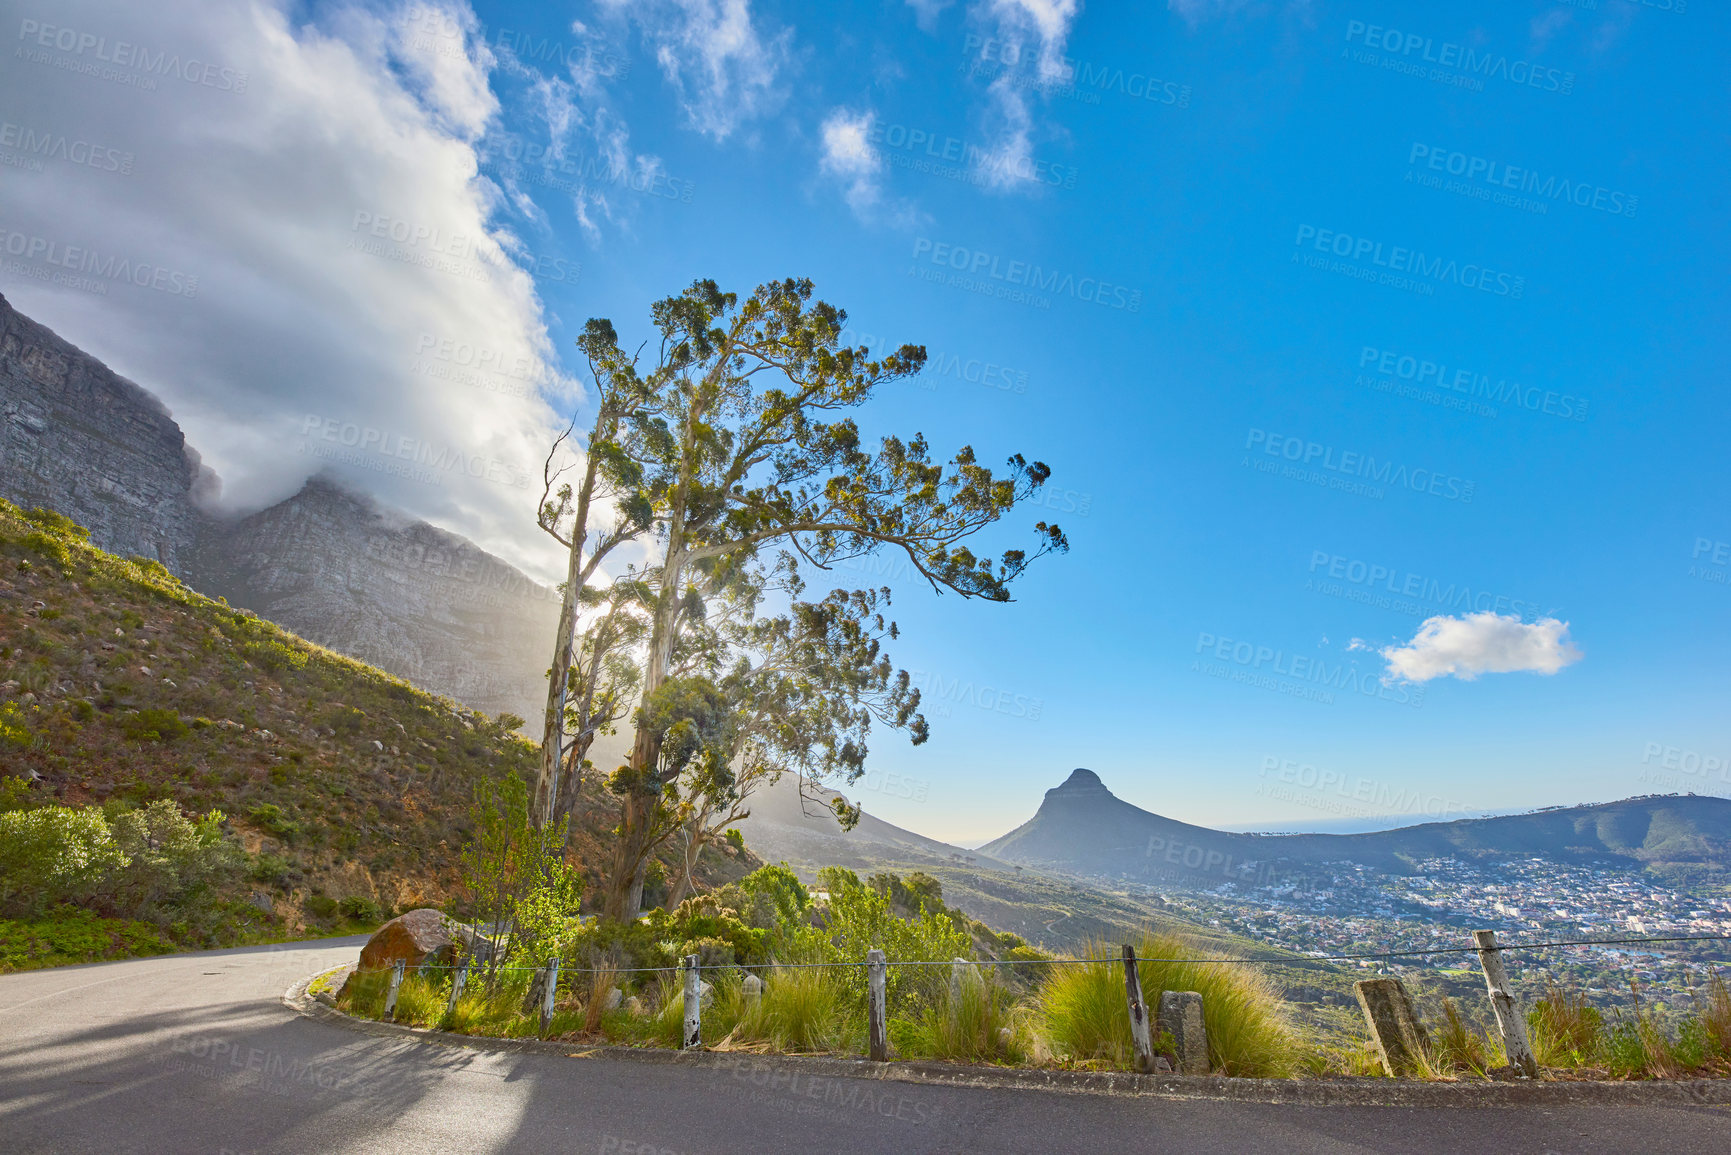 Buy stock photo Landscape of a scenic road on a mountainside near an uncultivated woodland on Table Mountain, Cape Town. Forest of tall trees growing on a slope in South Africa, overlooking the natural scenery